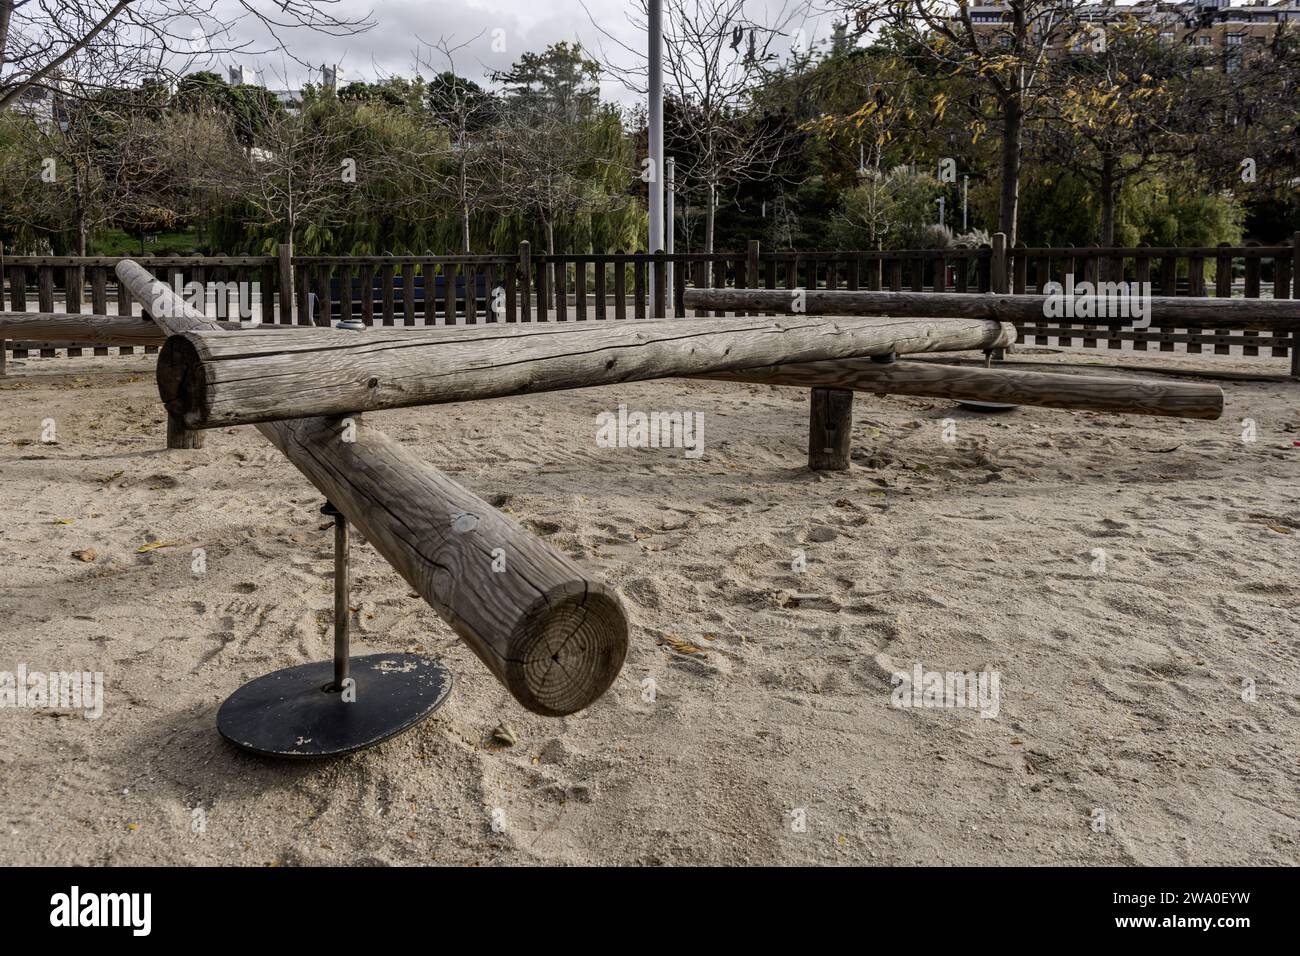 Classic playground equipment made from unvarnished wooden logs and old tires inside a playground in an urban playground Stock Photo